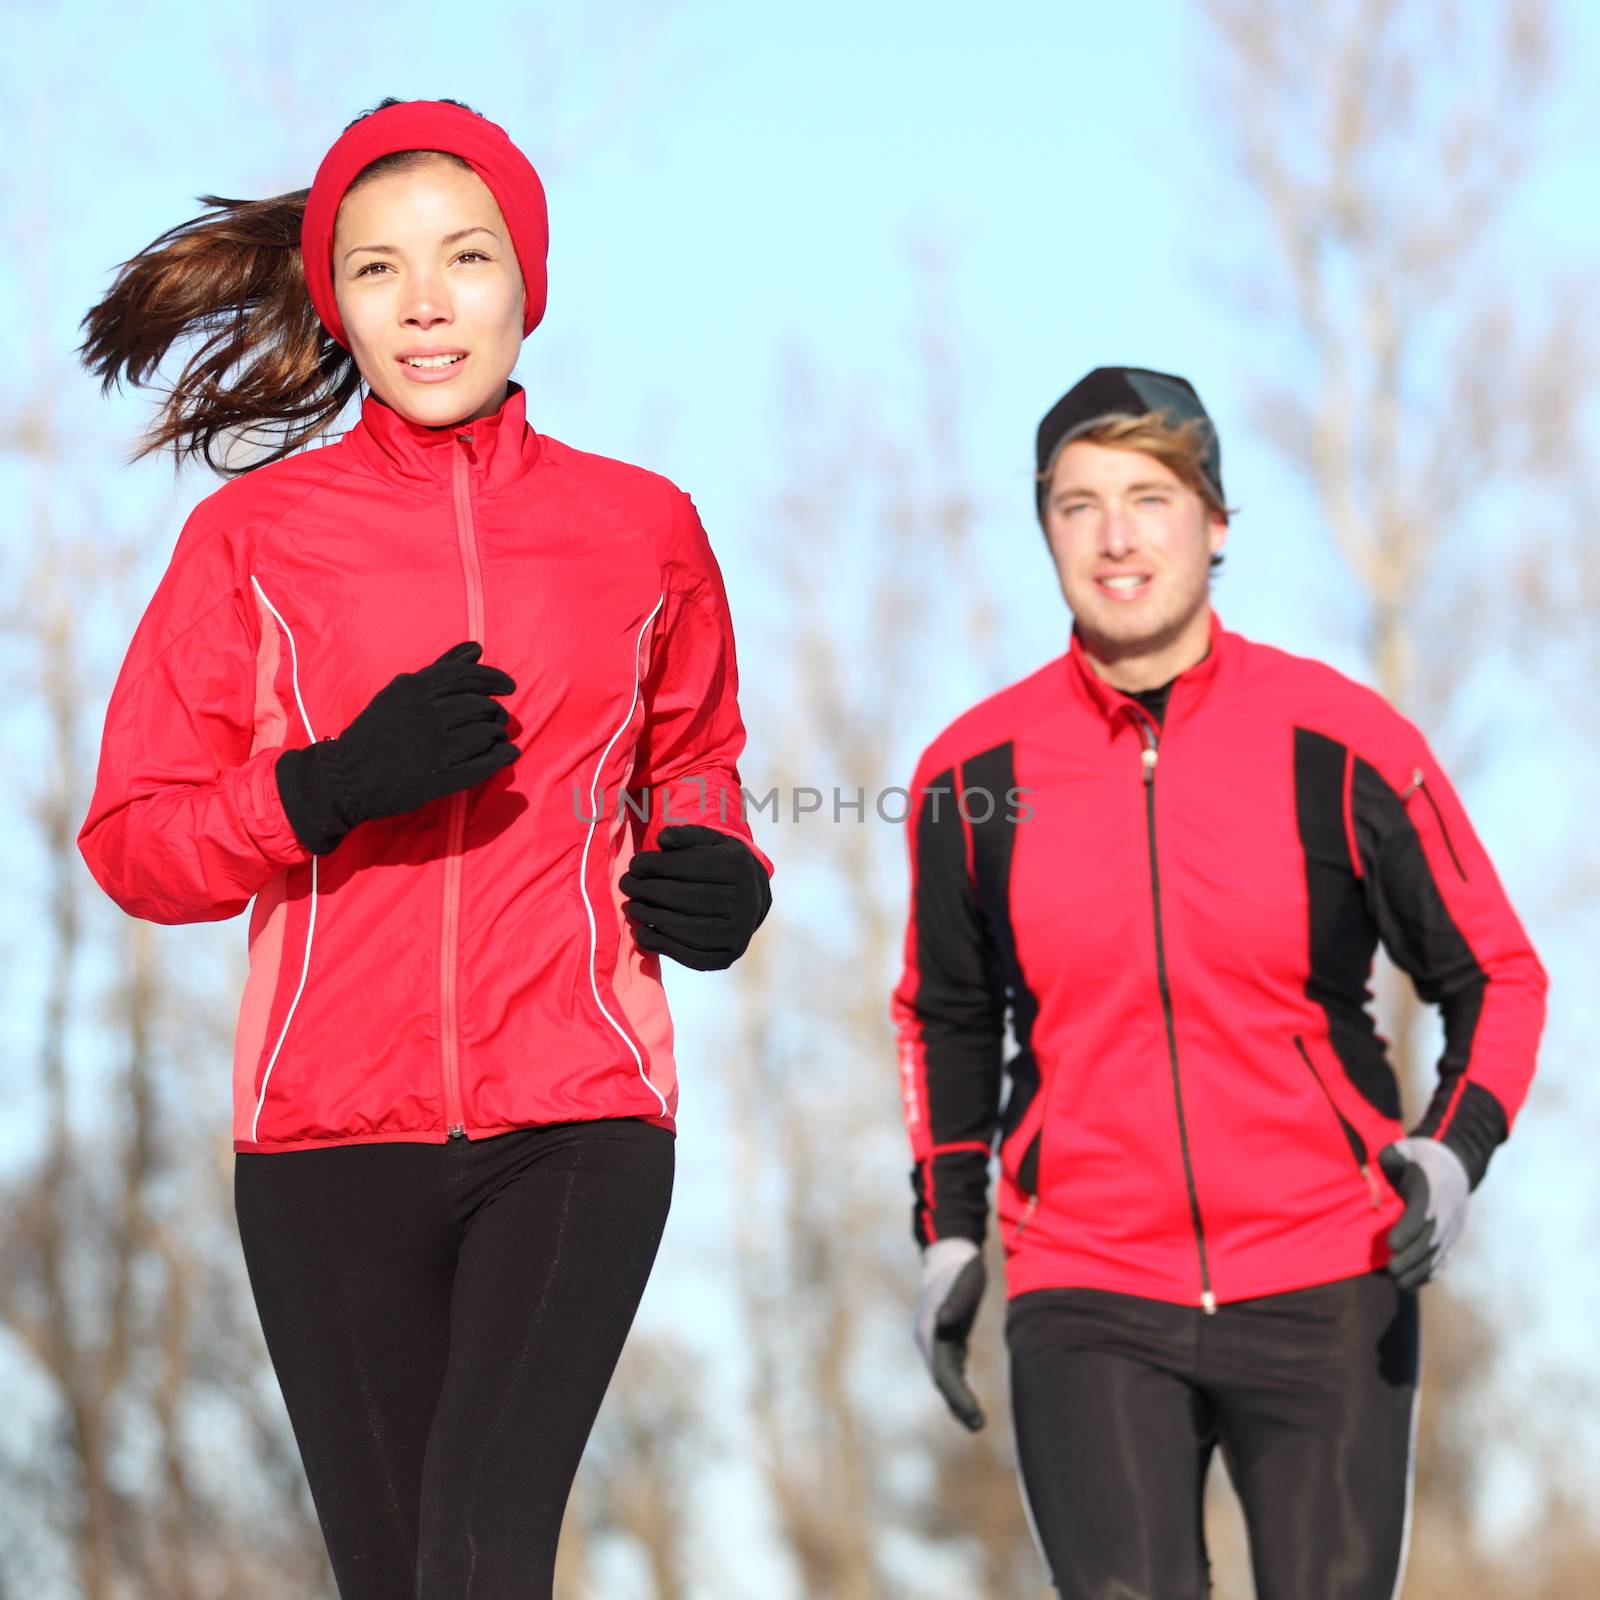 Healthy lifestyle winter running. Runner couple jogging in city park in warm winter sports clothing. Fit Asian woman fitness model and Caucasian man model.